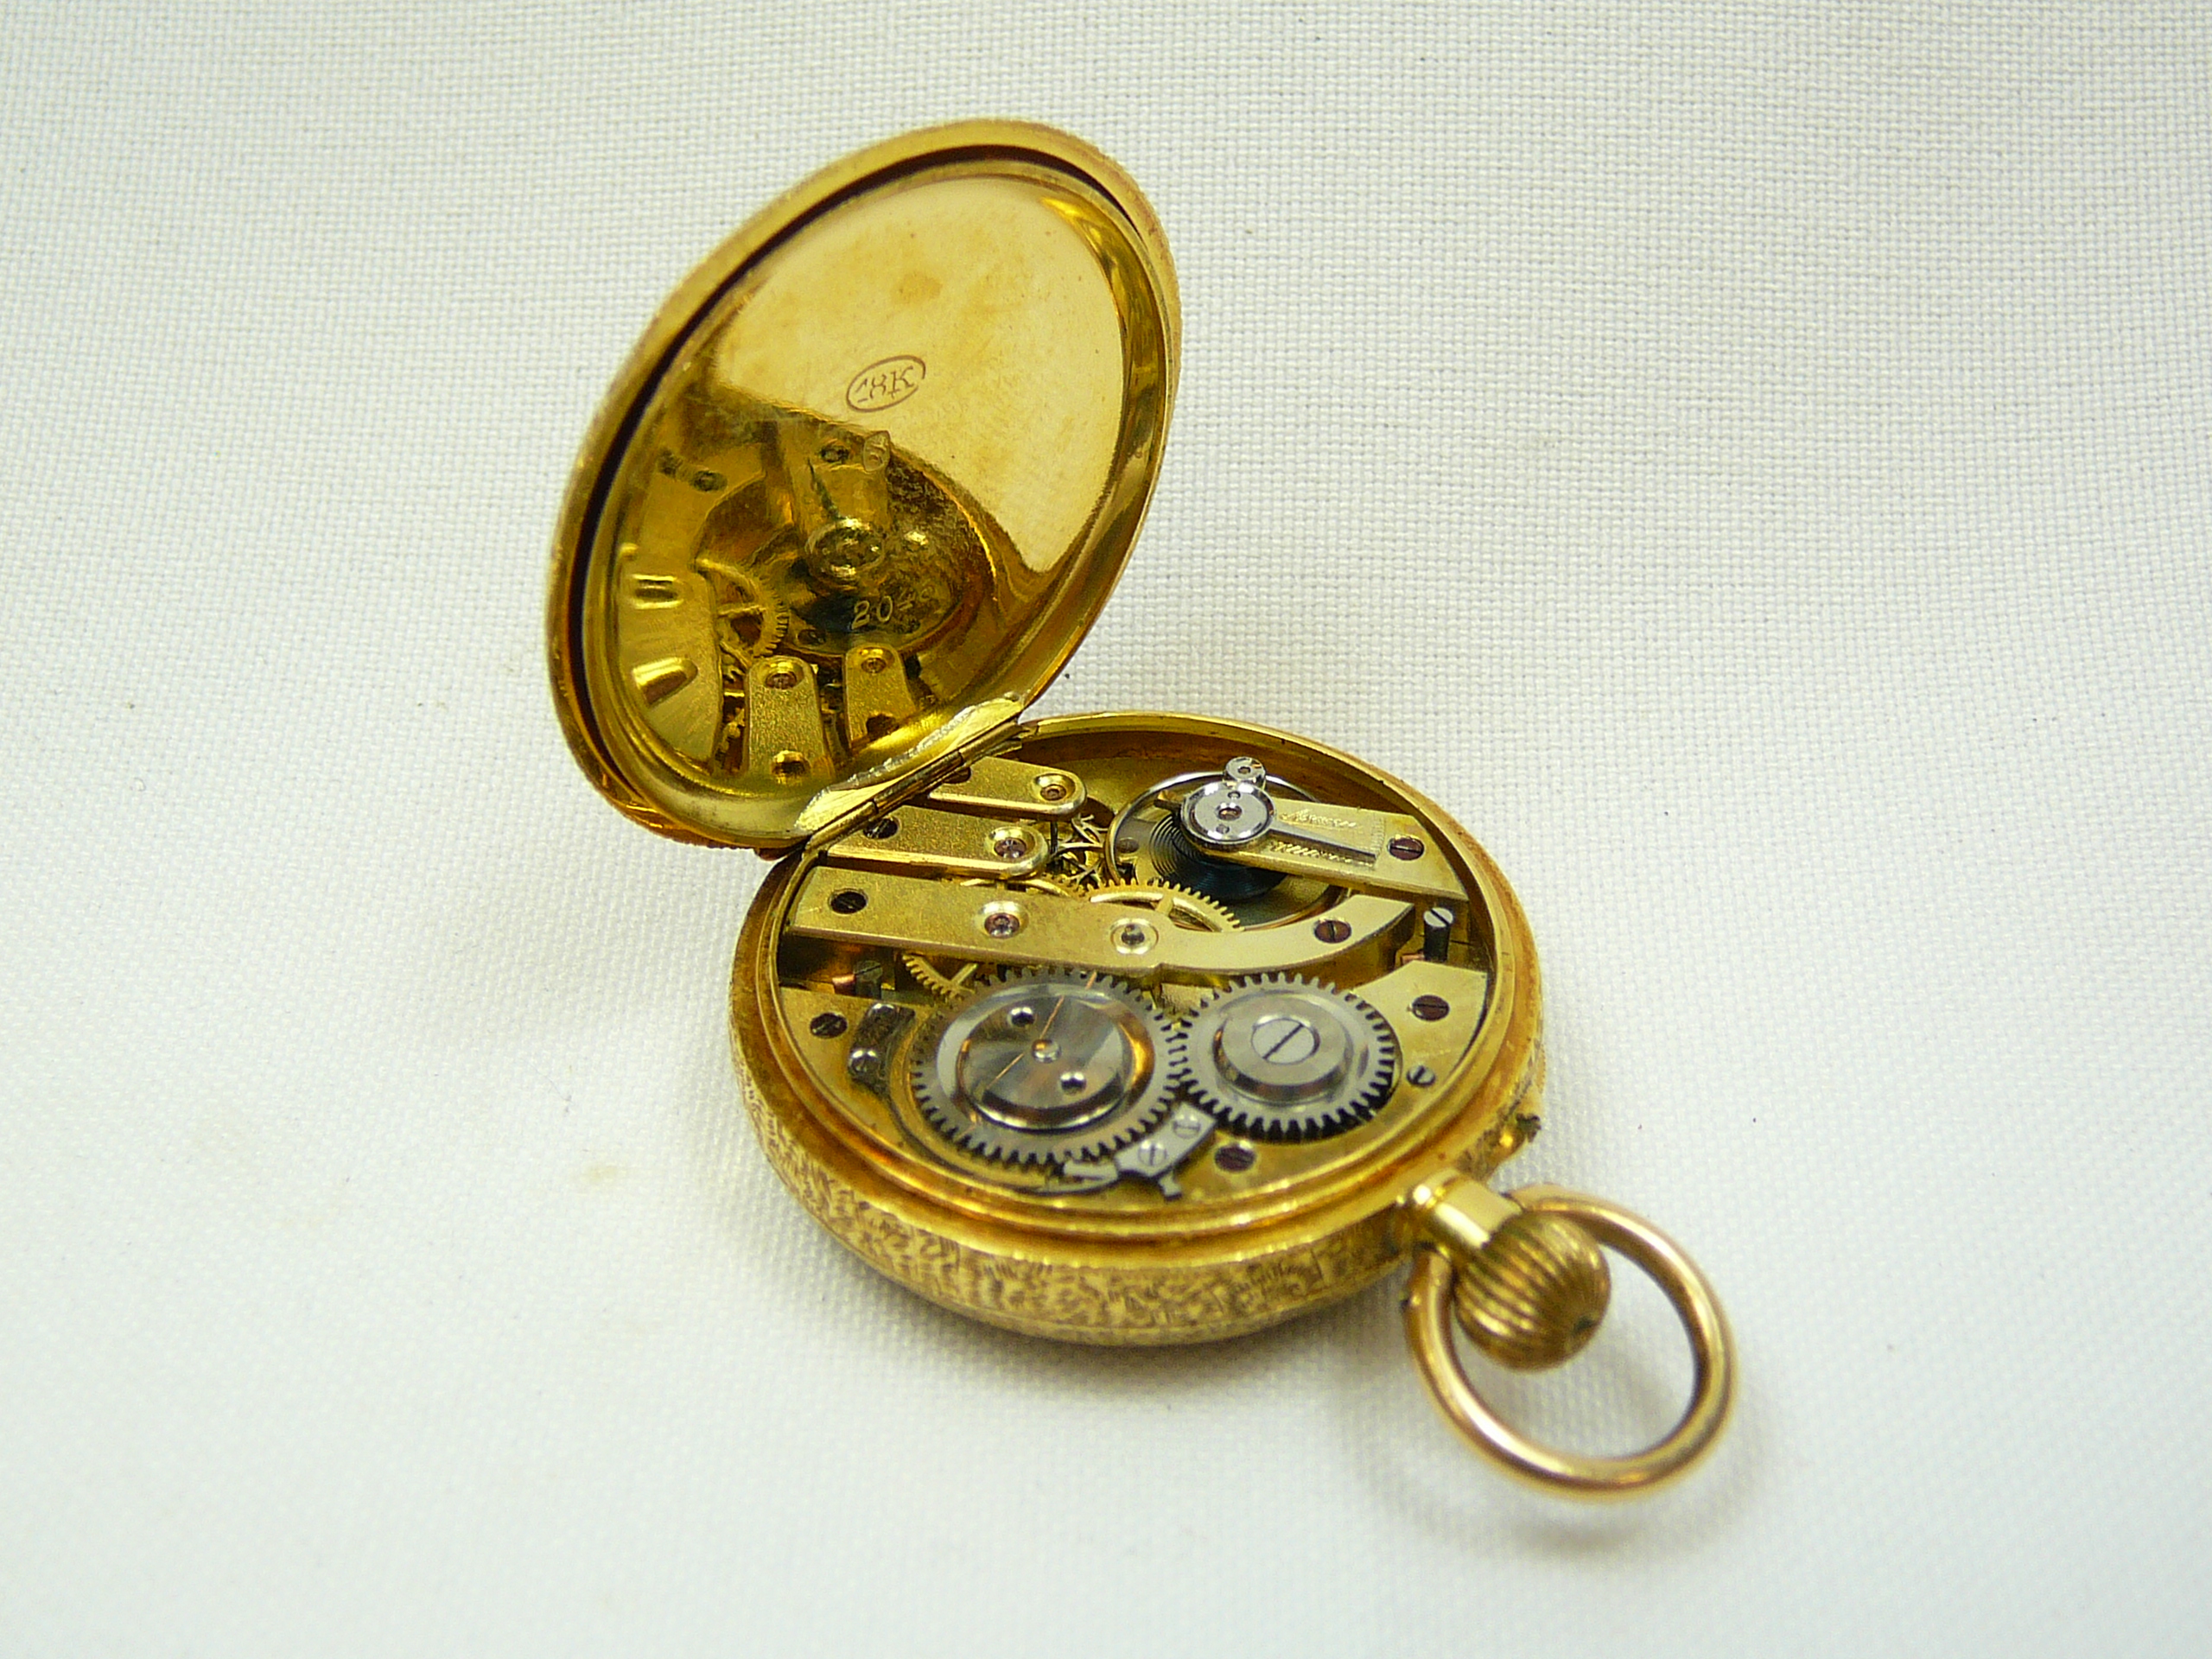 Ladies Antique Gold Fob Watch - Image 4 of 4